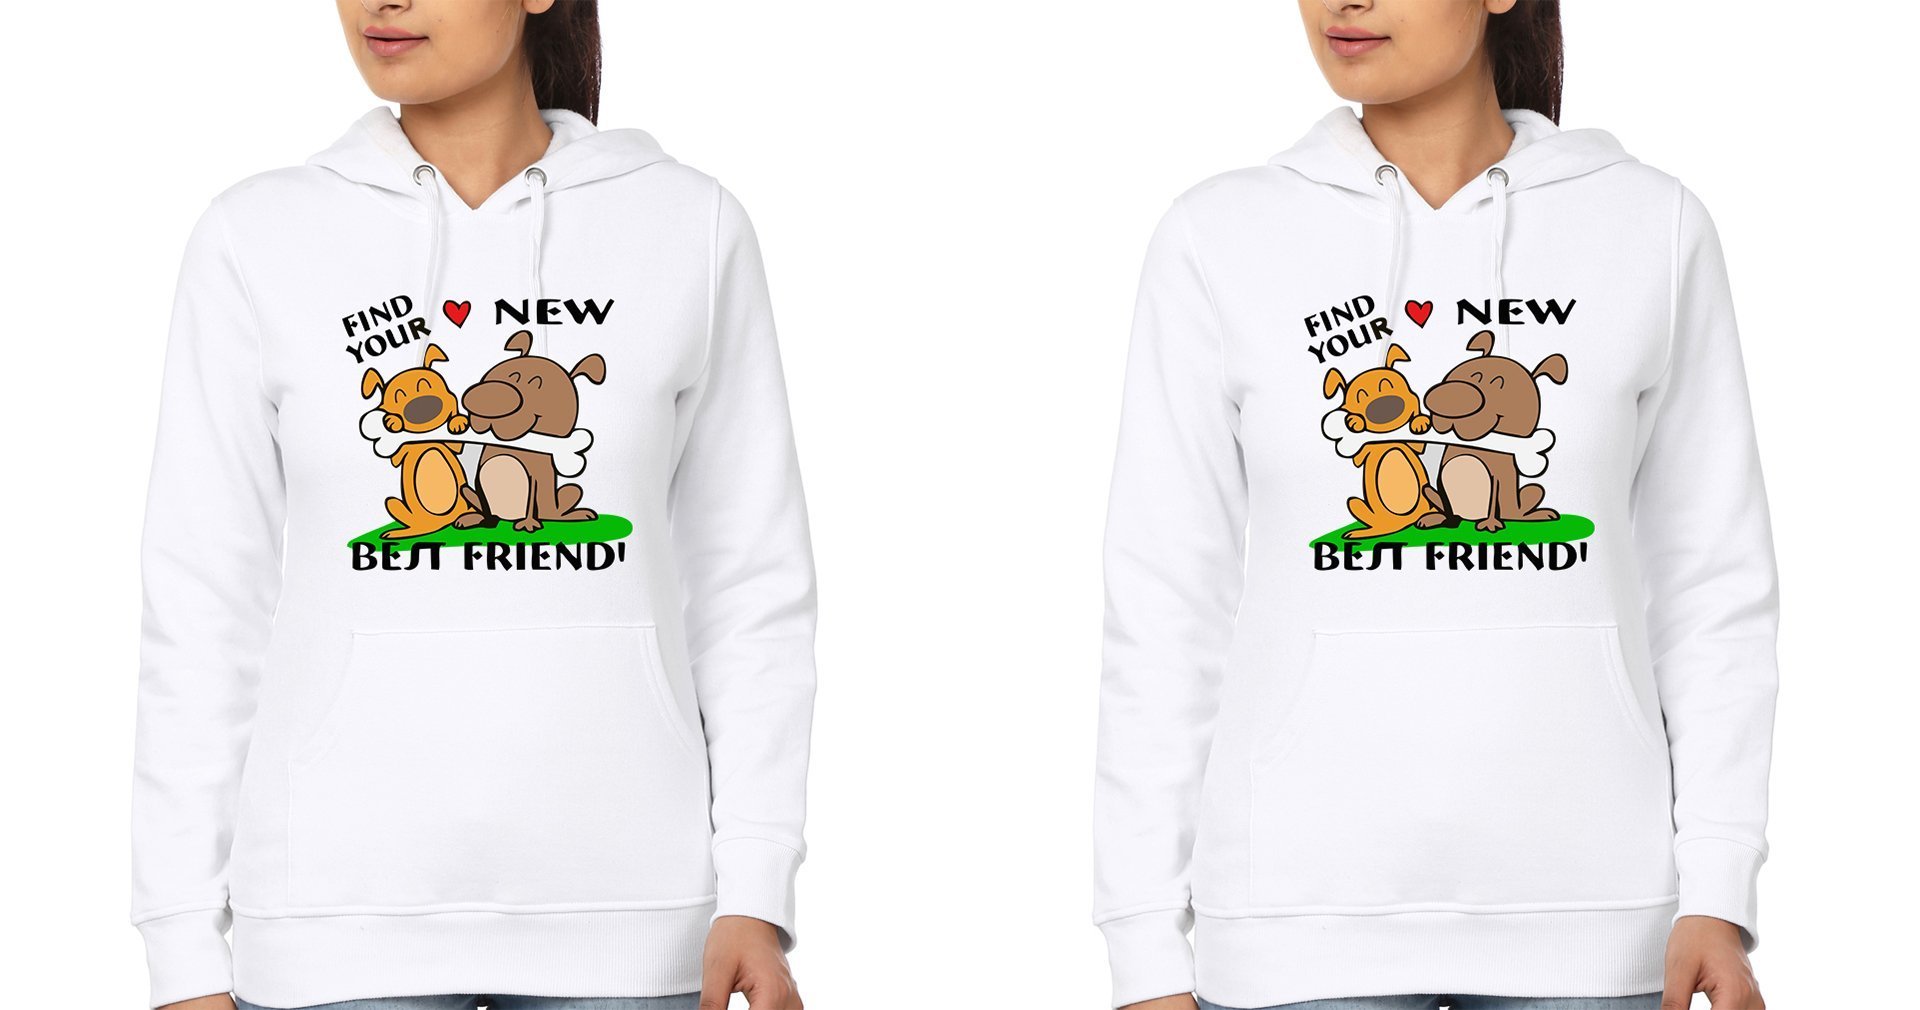 Find Your New Best friend BFF Hoodies-FunkyTradition - FunkyTradition